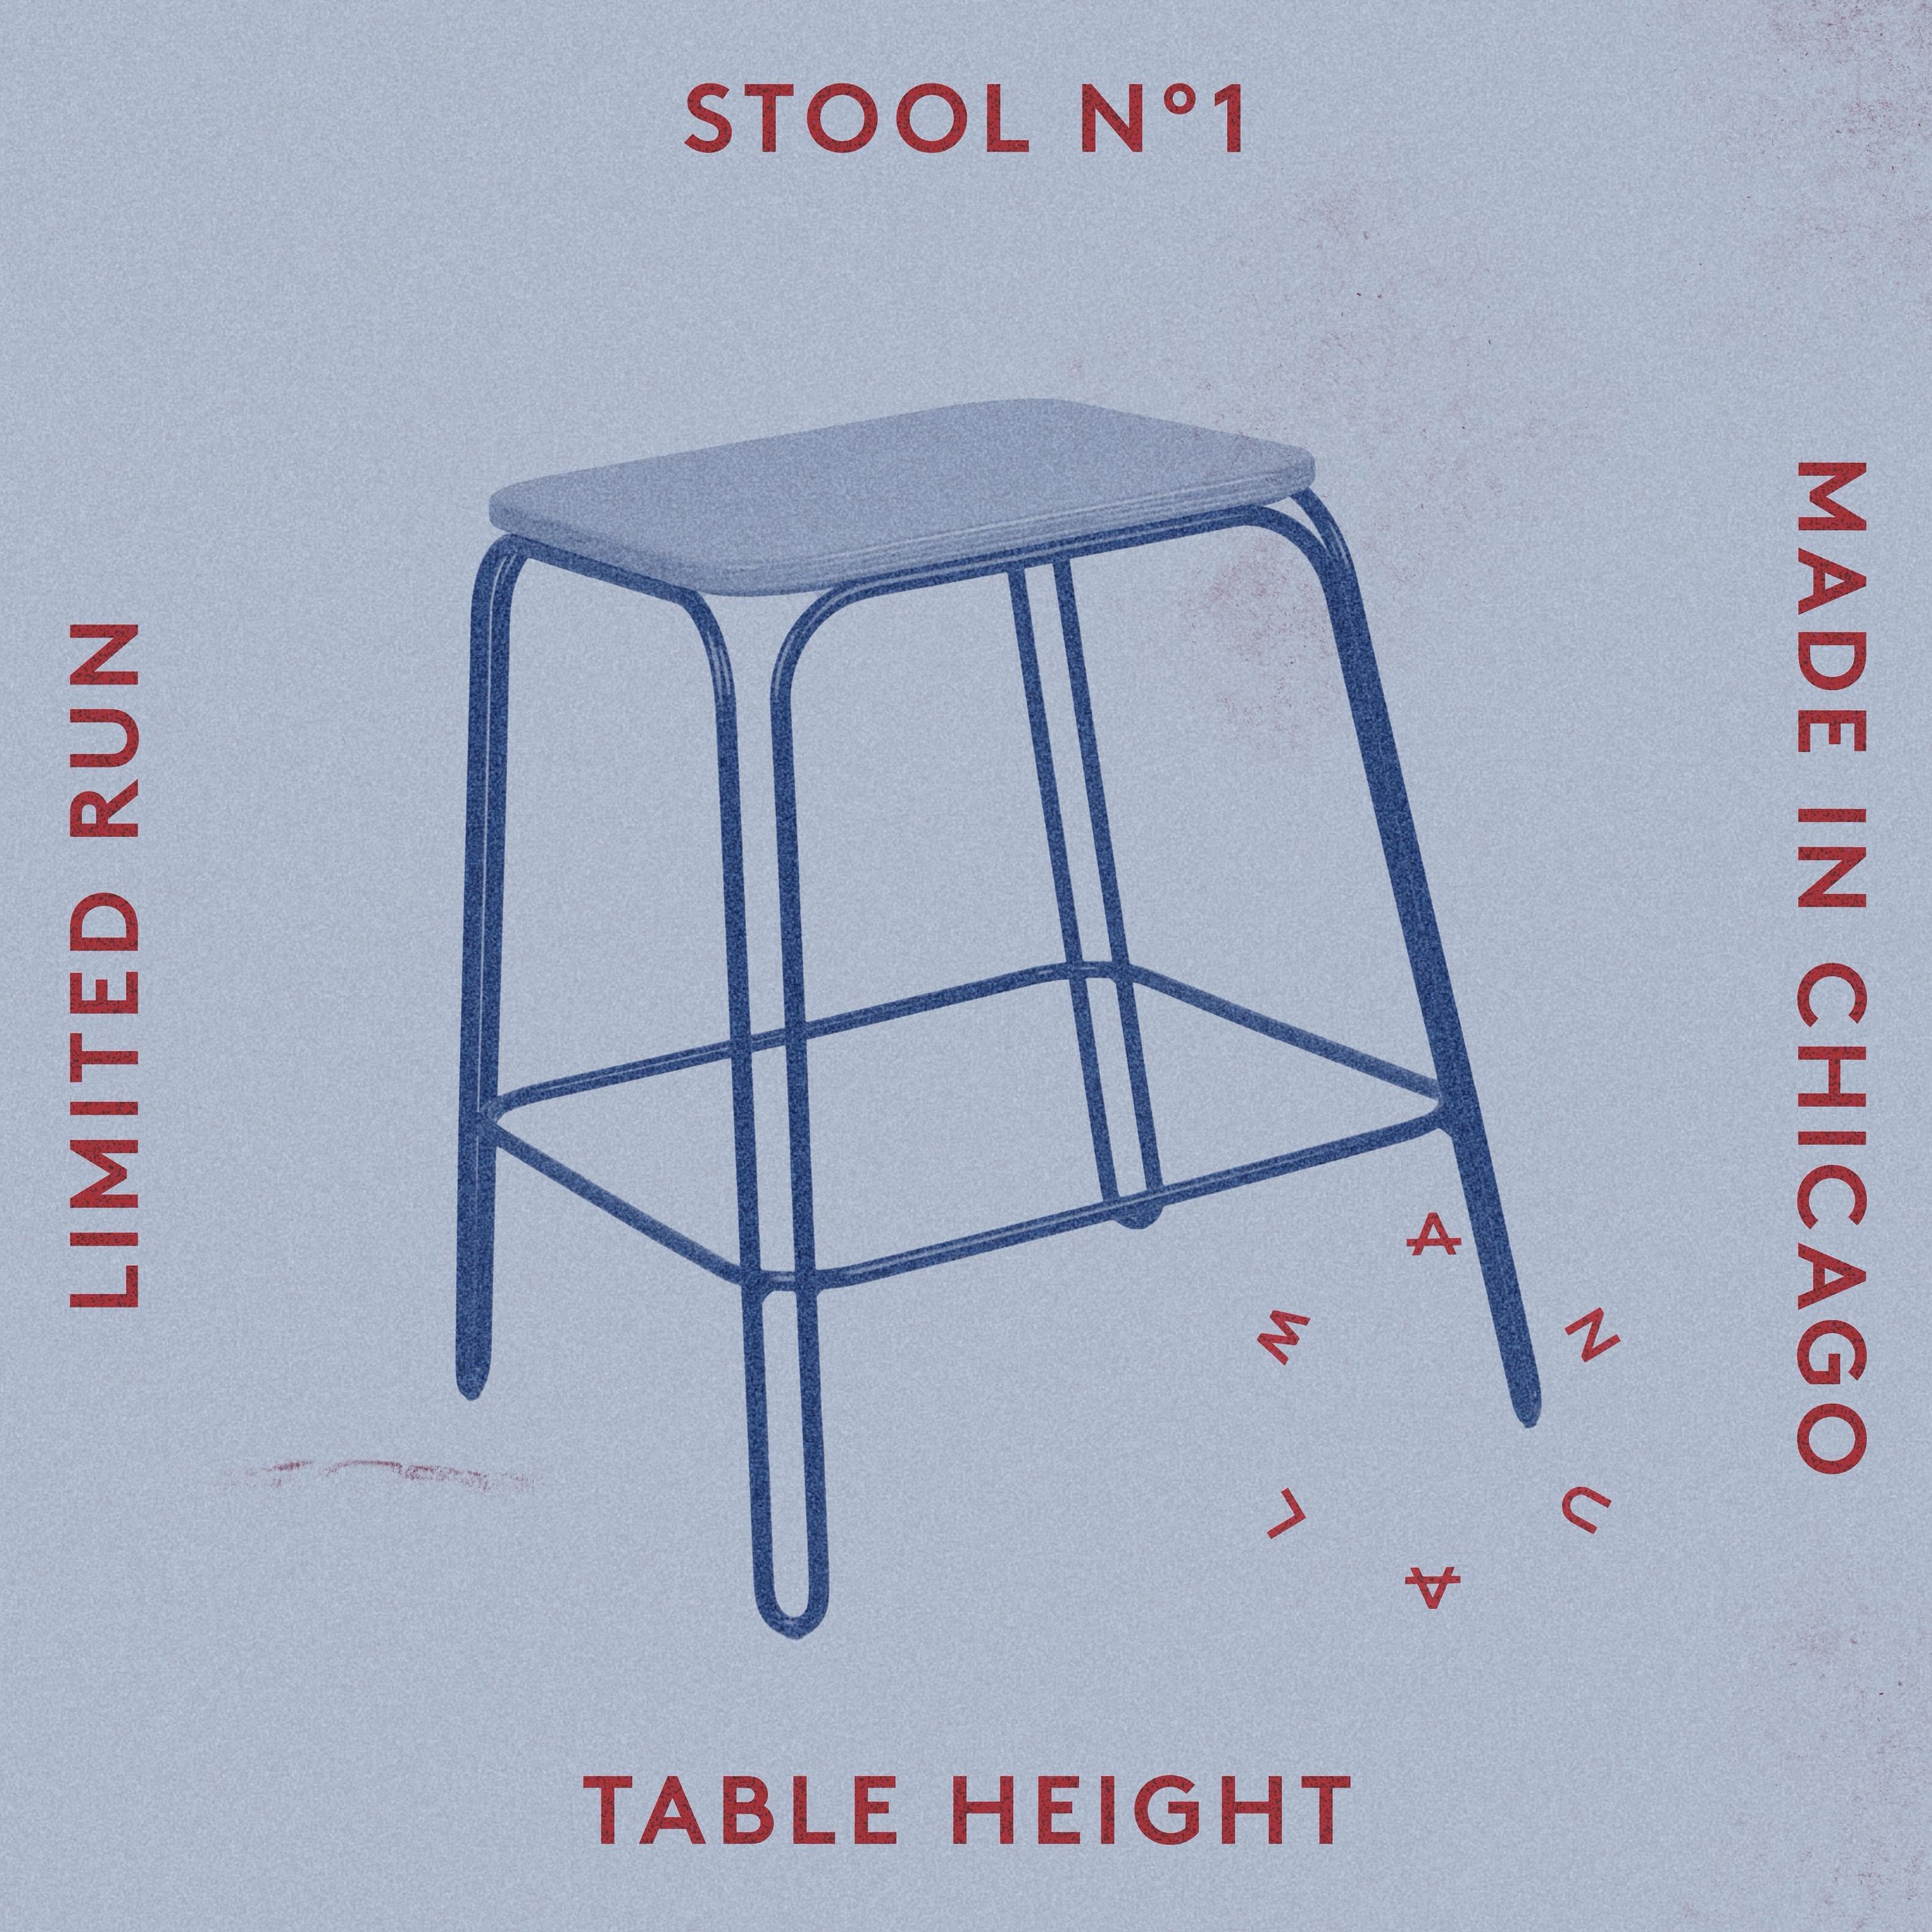 I&rsquo;m making a set of Stool N&deg;1 shorties for a new cafe here in Chicago and decided to make 6 extras. The table height might be my favorite version! Pre-order on our website, ready by mid-May. Local pick up preferred, but shipping is availabl